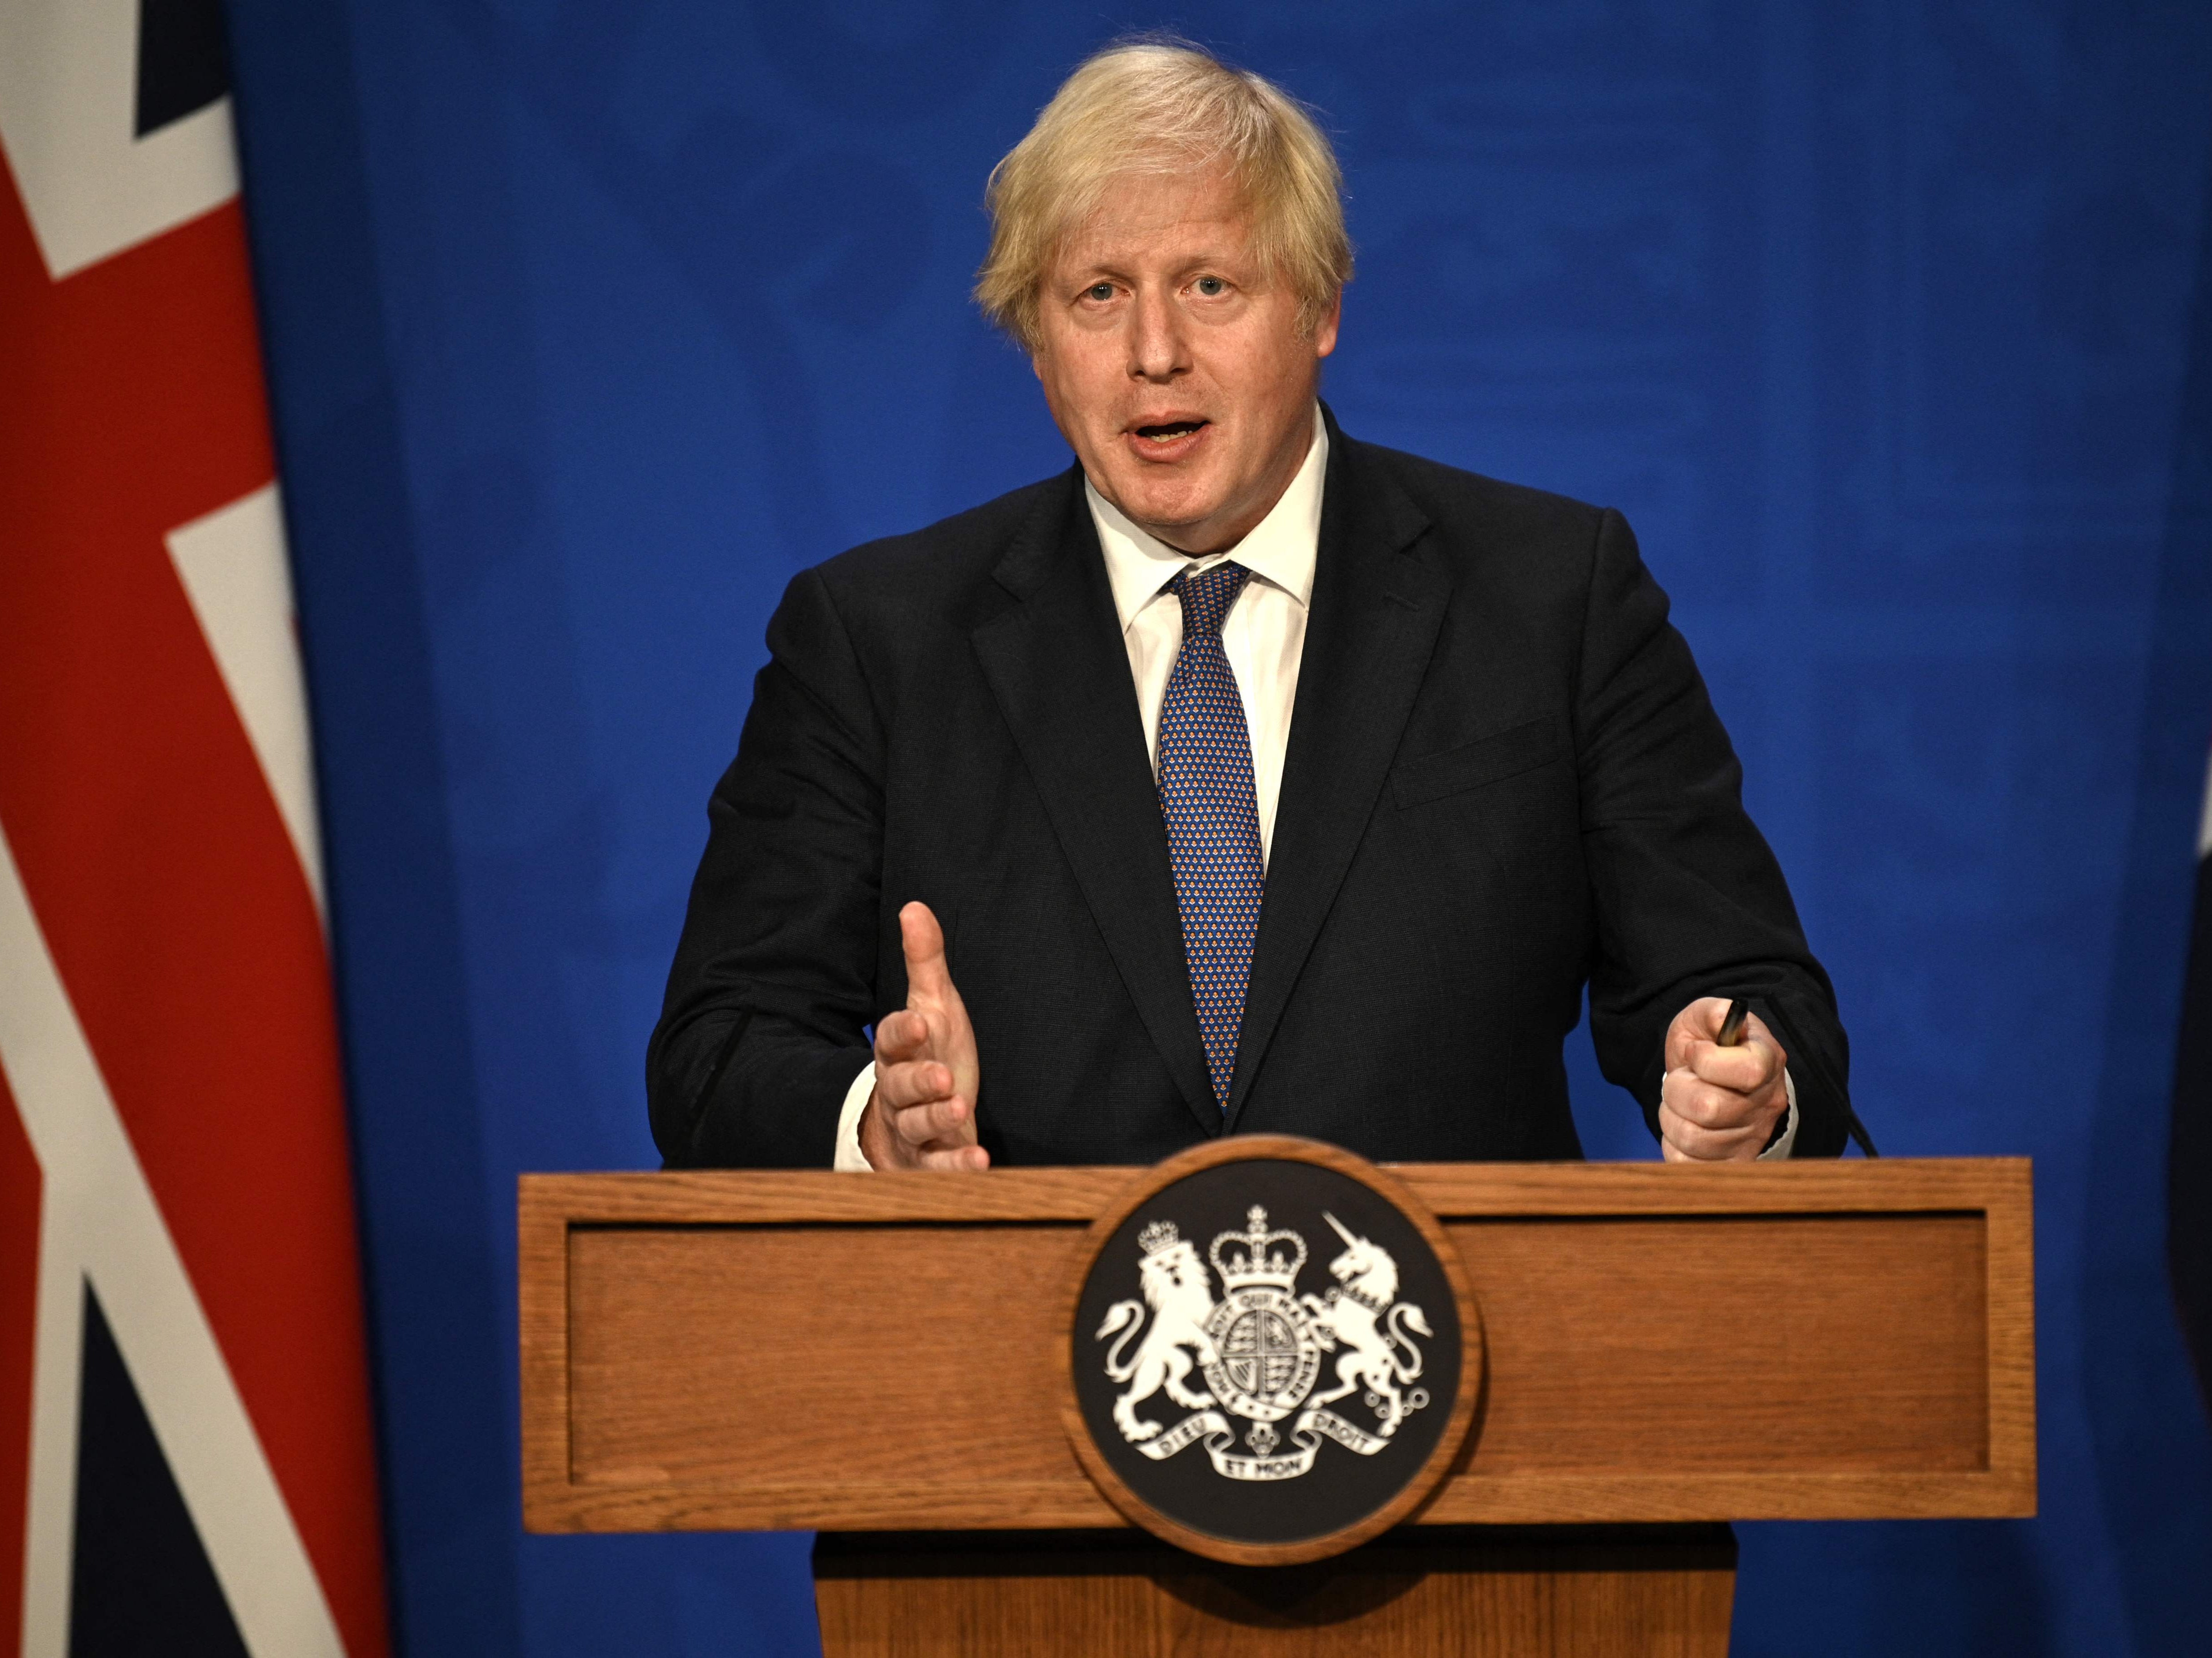 Cuts to overseas aid and to the wallets of Britain’s poorest will further undermine Boris Johnson’s attempt to revive the levelling up agenda